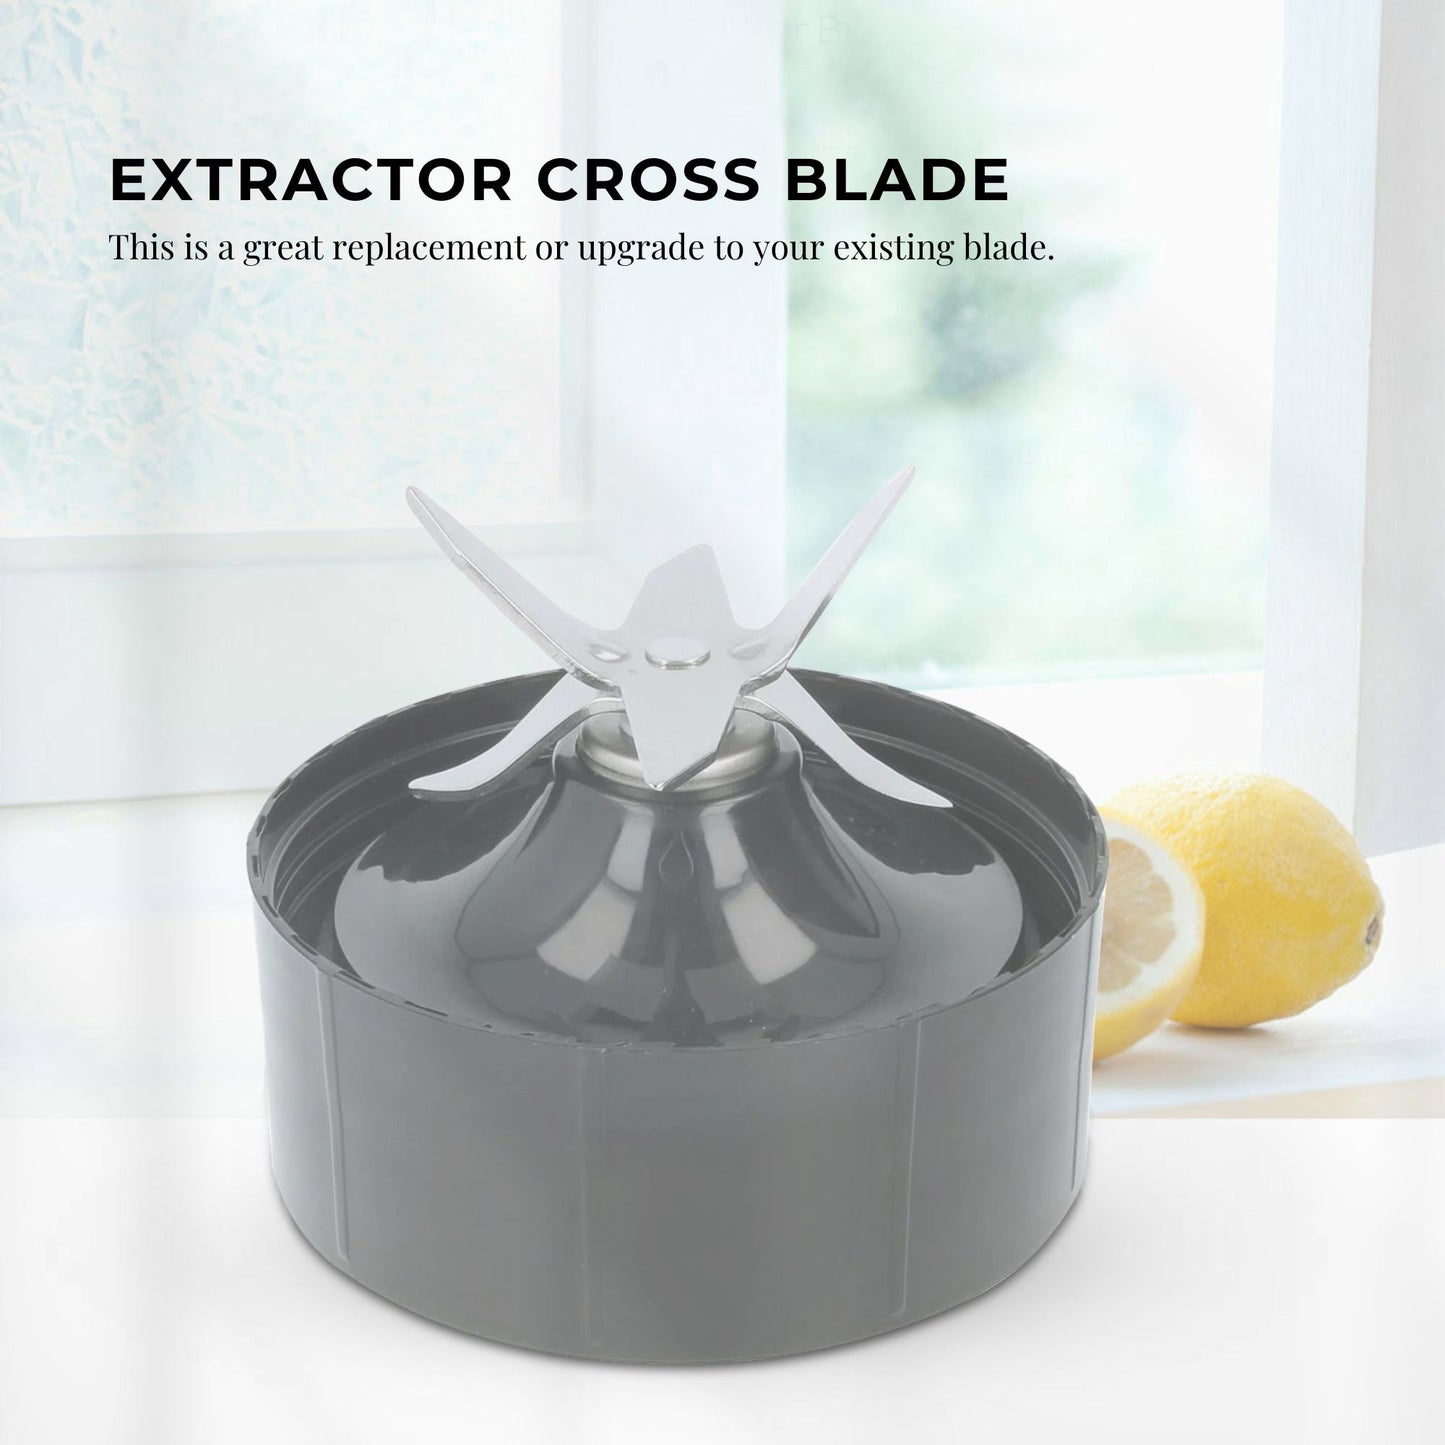 For Nutribullet Extractor Cross Blade - 1200W 1200 Replacement Blender Part